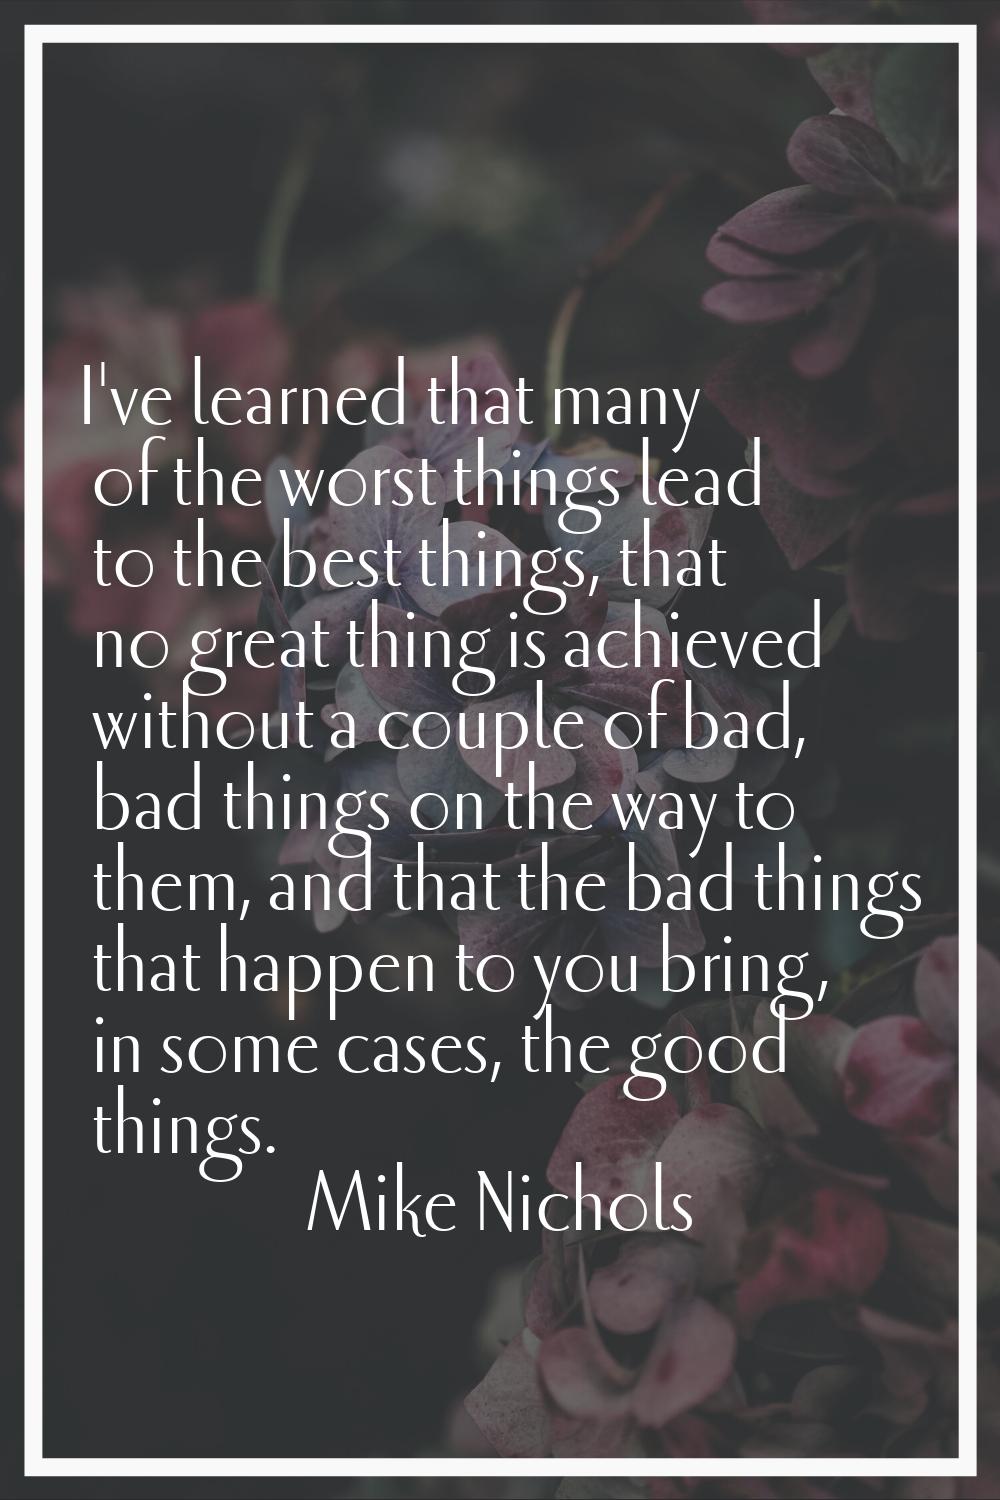 I've learned that many of the worst things lead to the best things, that no great thing is achieved